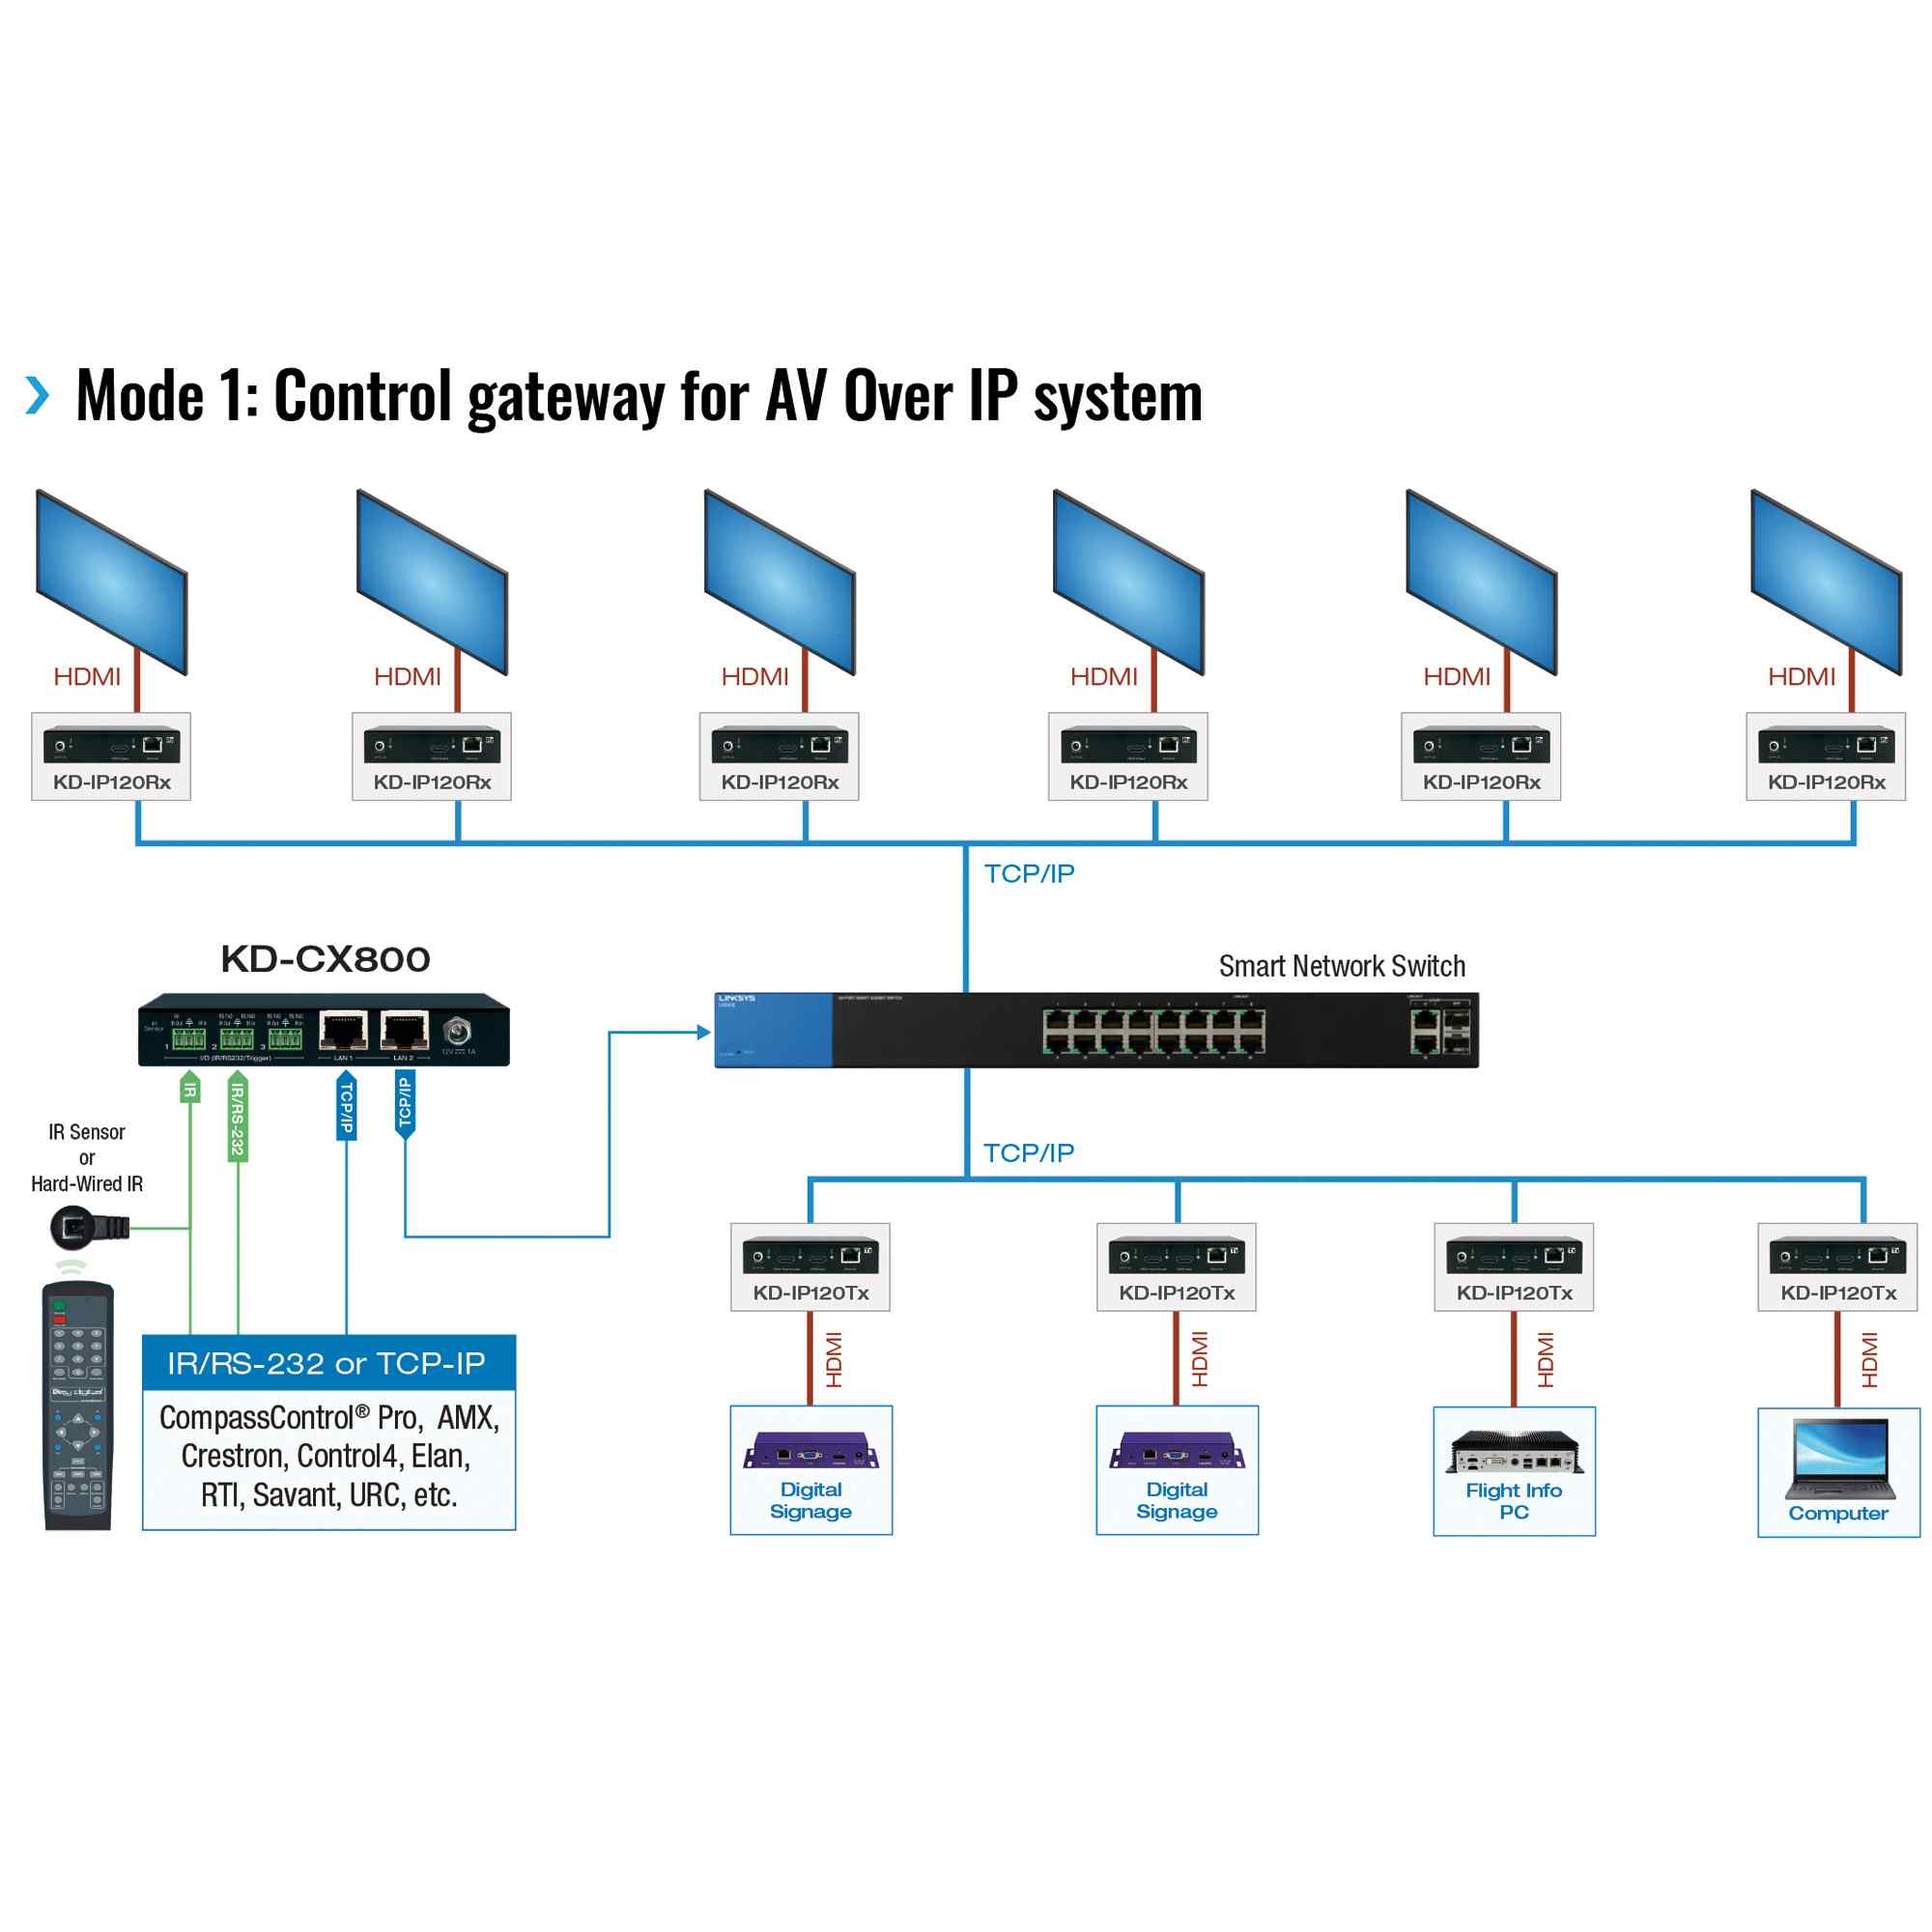 Example Diagram showing control gateway for AV over IP system